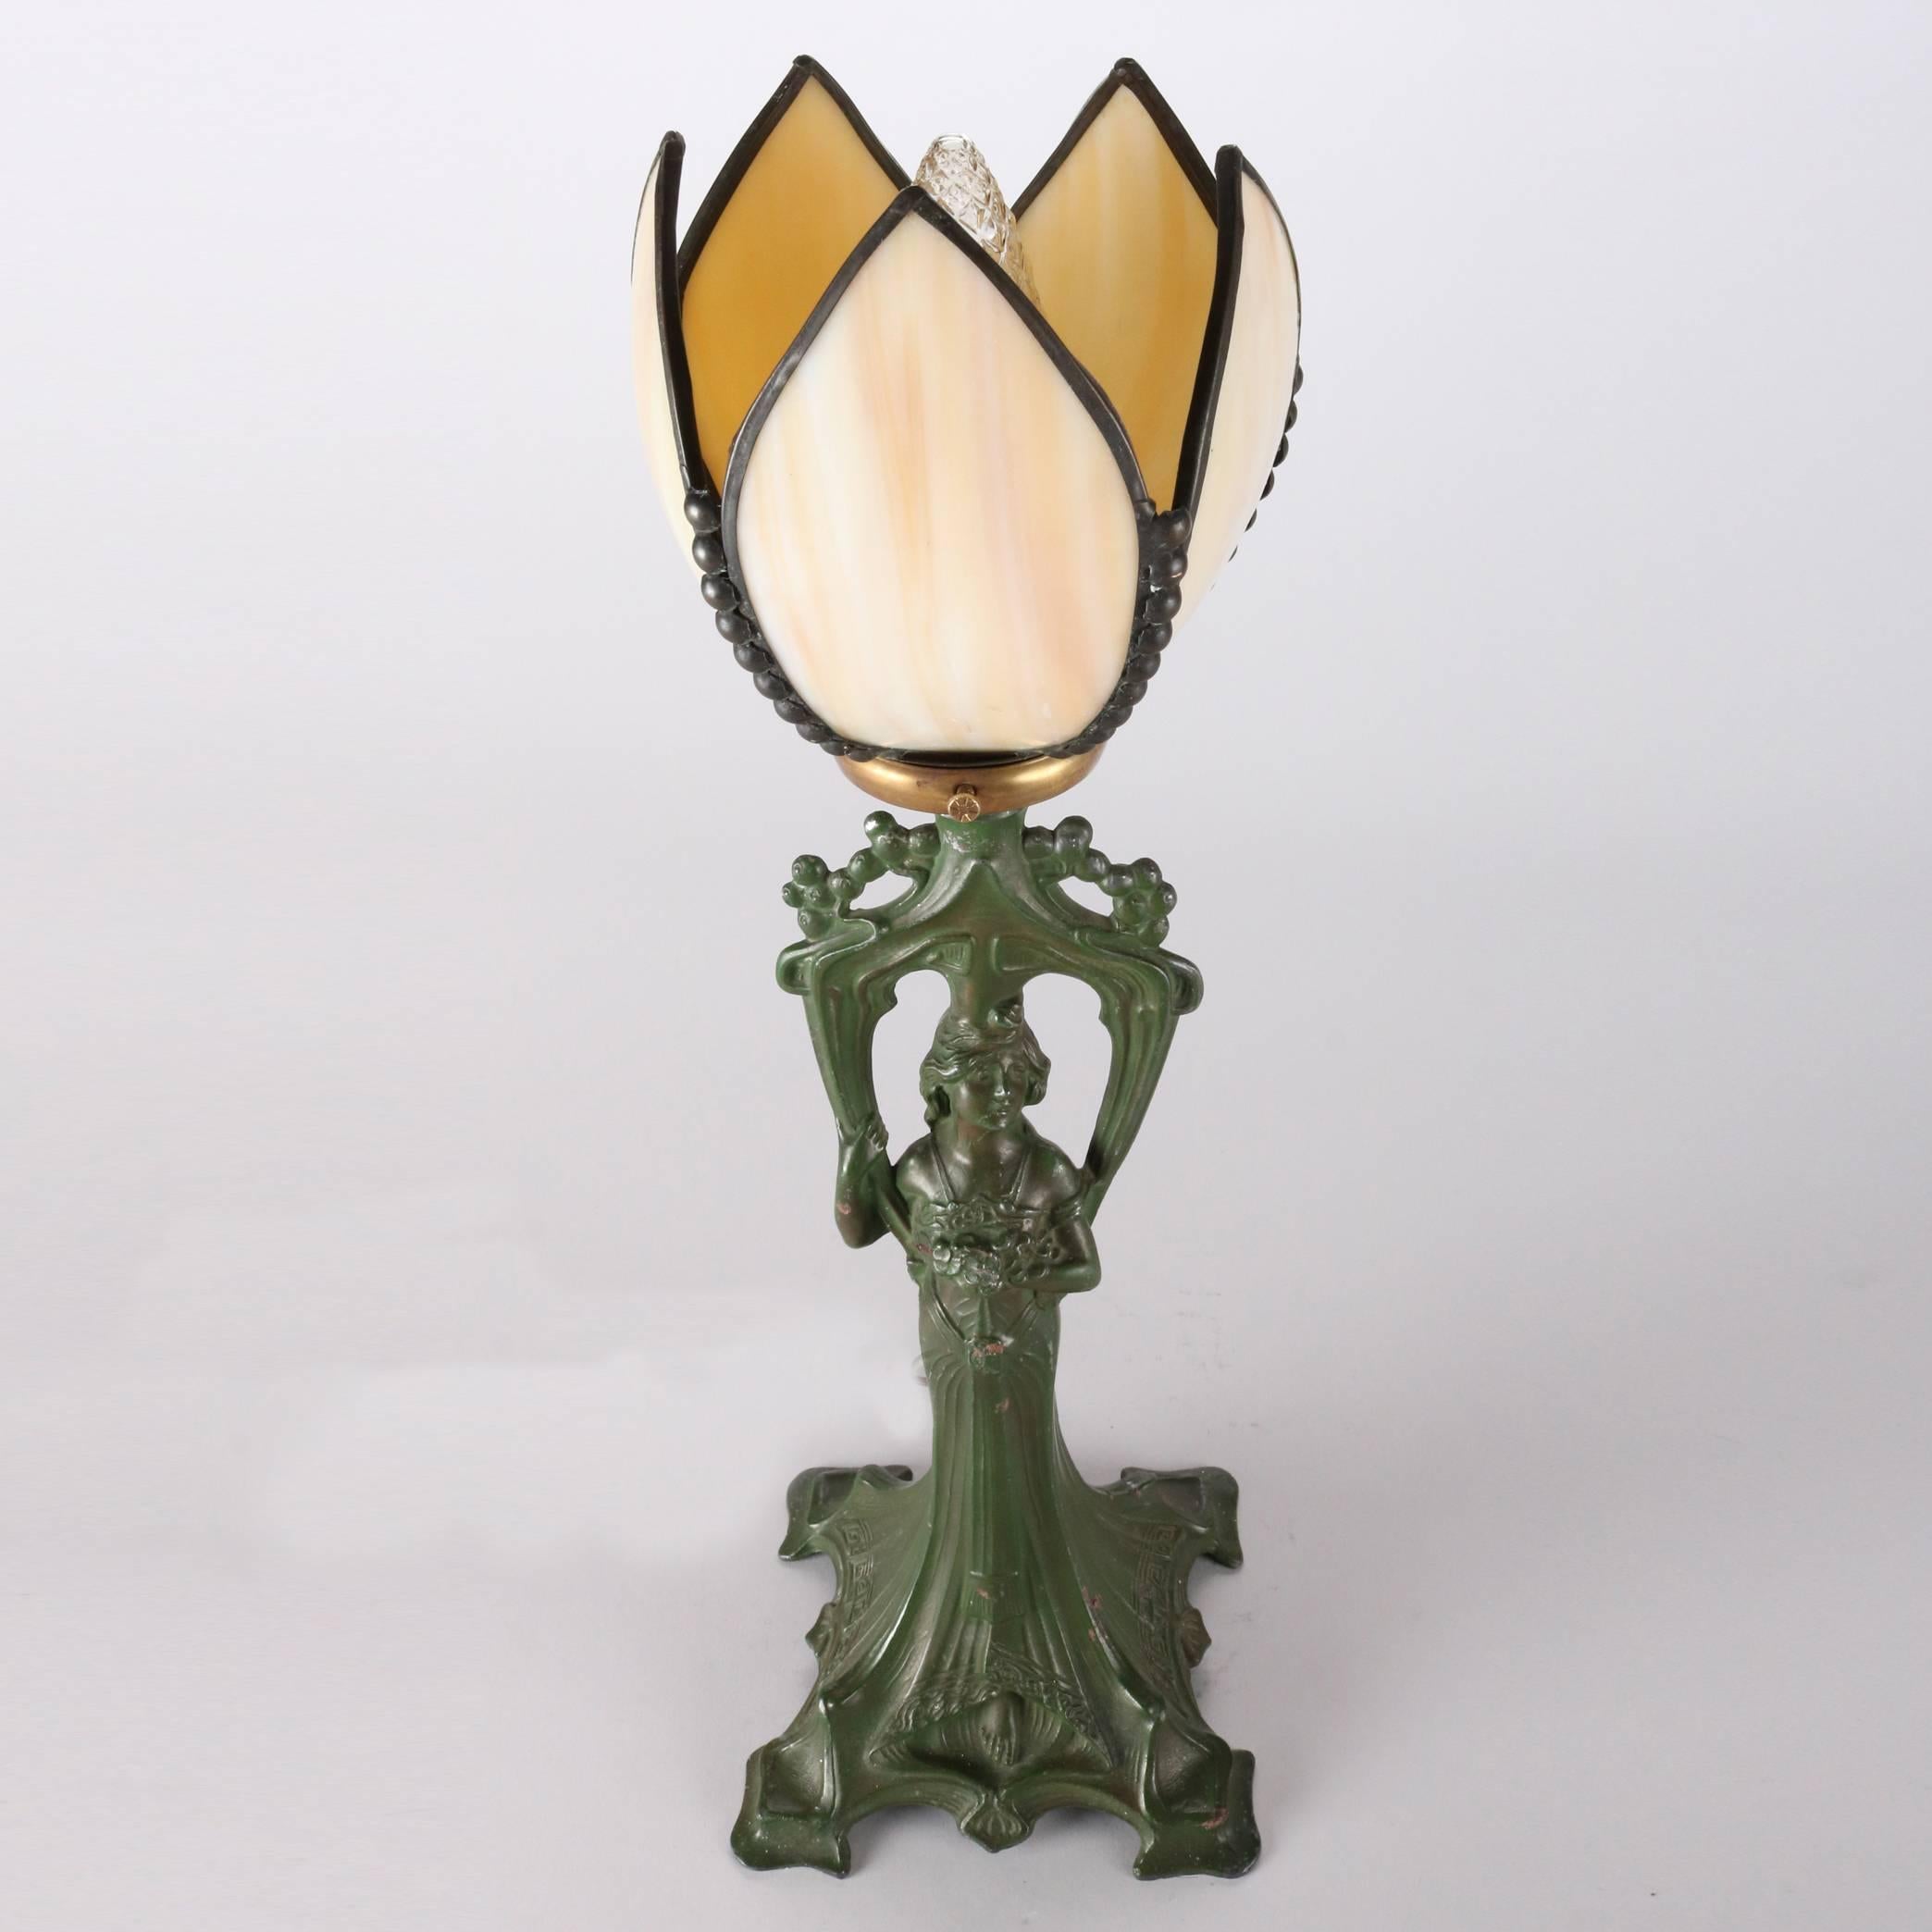 Antique Art Deco green painted figural Frankart School table lamp features woman with floral bouquet, her sweeping dress forming the footed base supporting replacement slag glass tulip form shade, elements of Art Nouveau Mucha School, newly